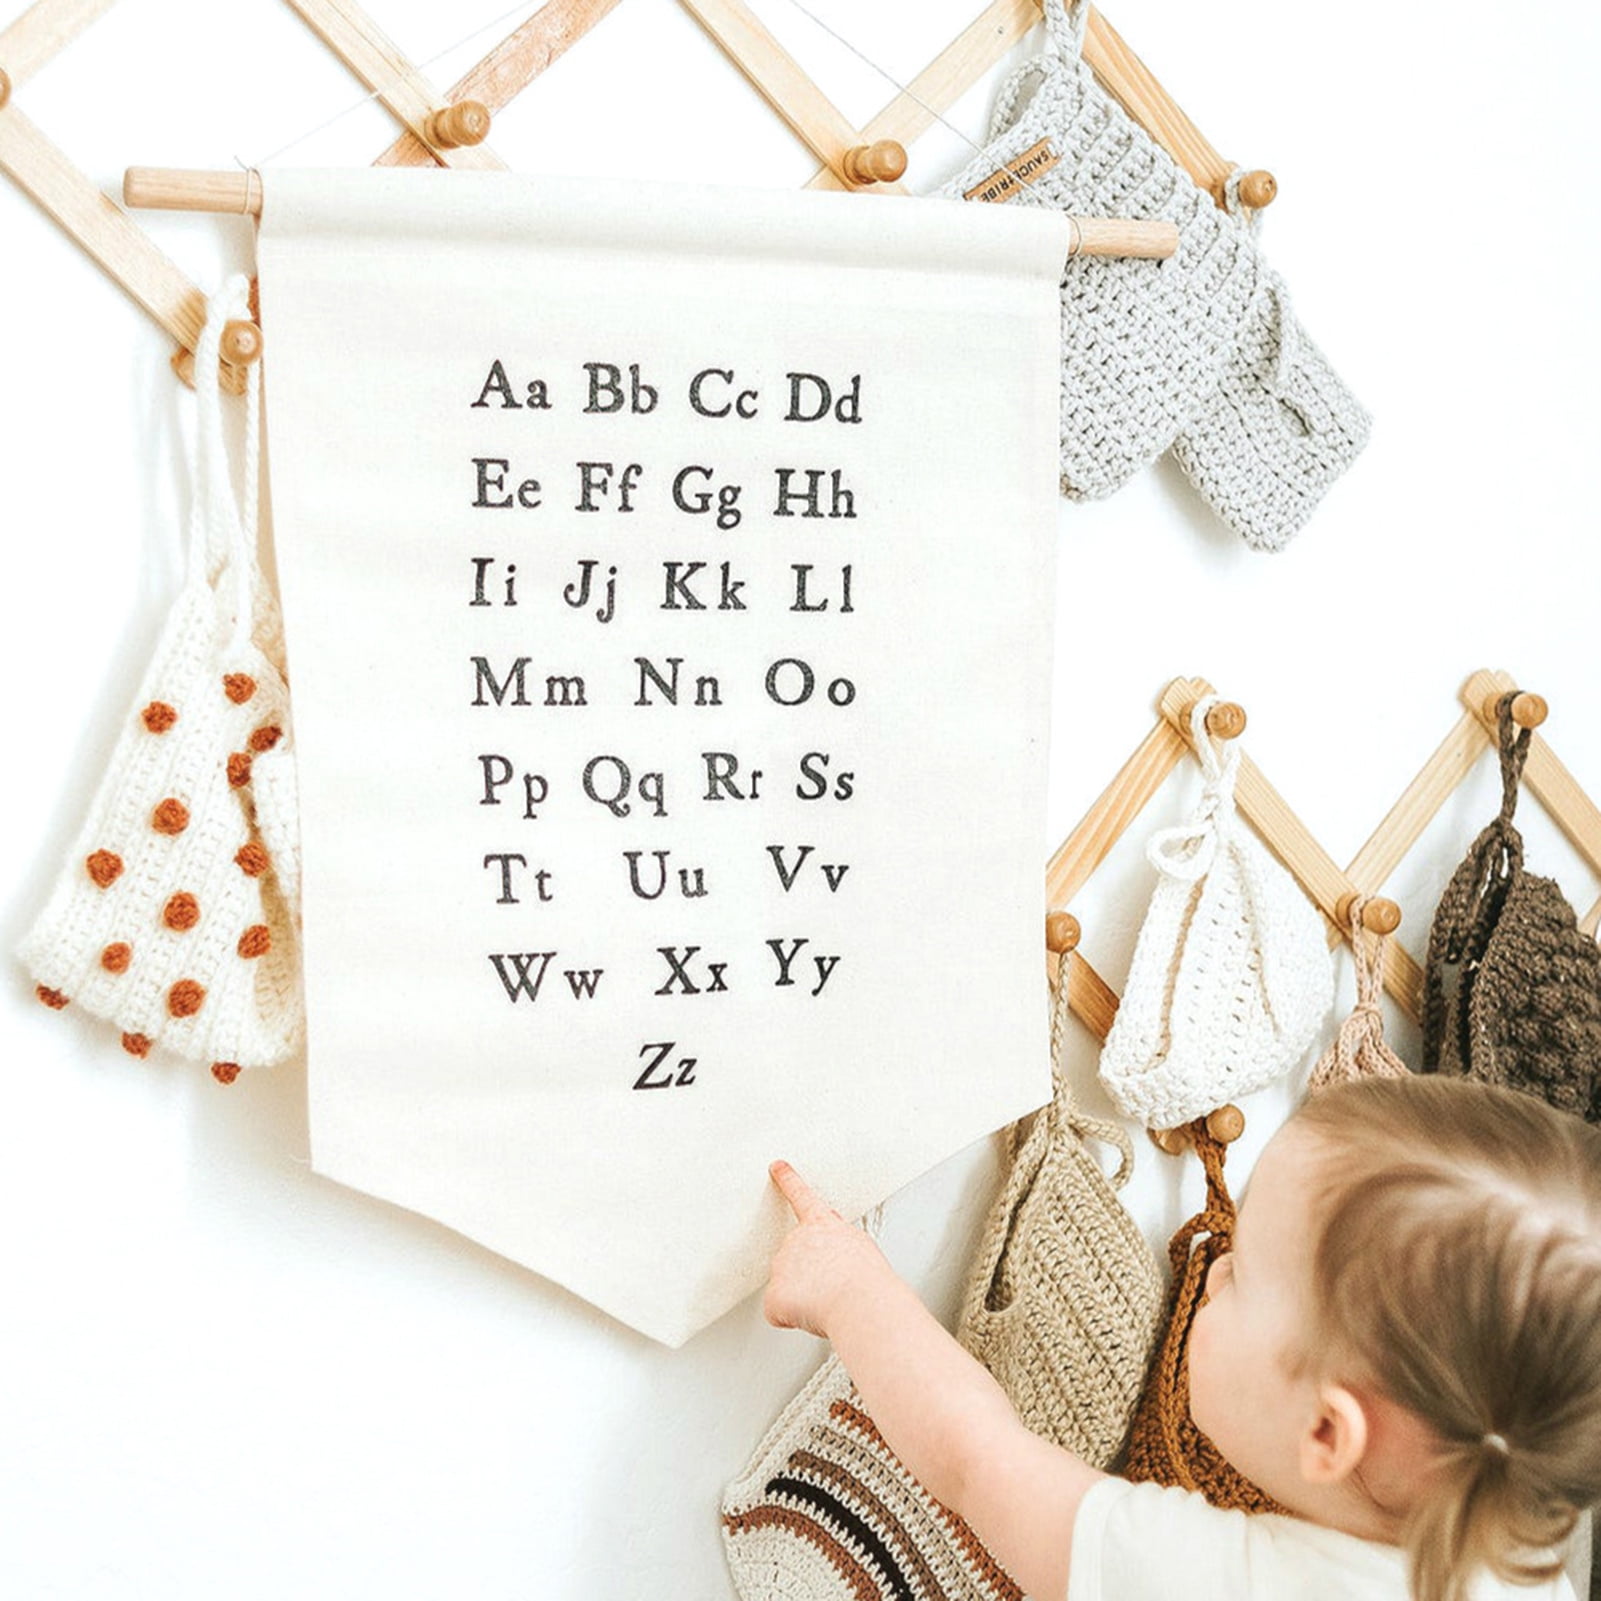 Nursery Wall Canvas Banners Home Decorative Plaque Letter Teen and Kids Room Cotton Alphabet Wall Hanging Decoration for Baby Girl Baby Boy 